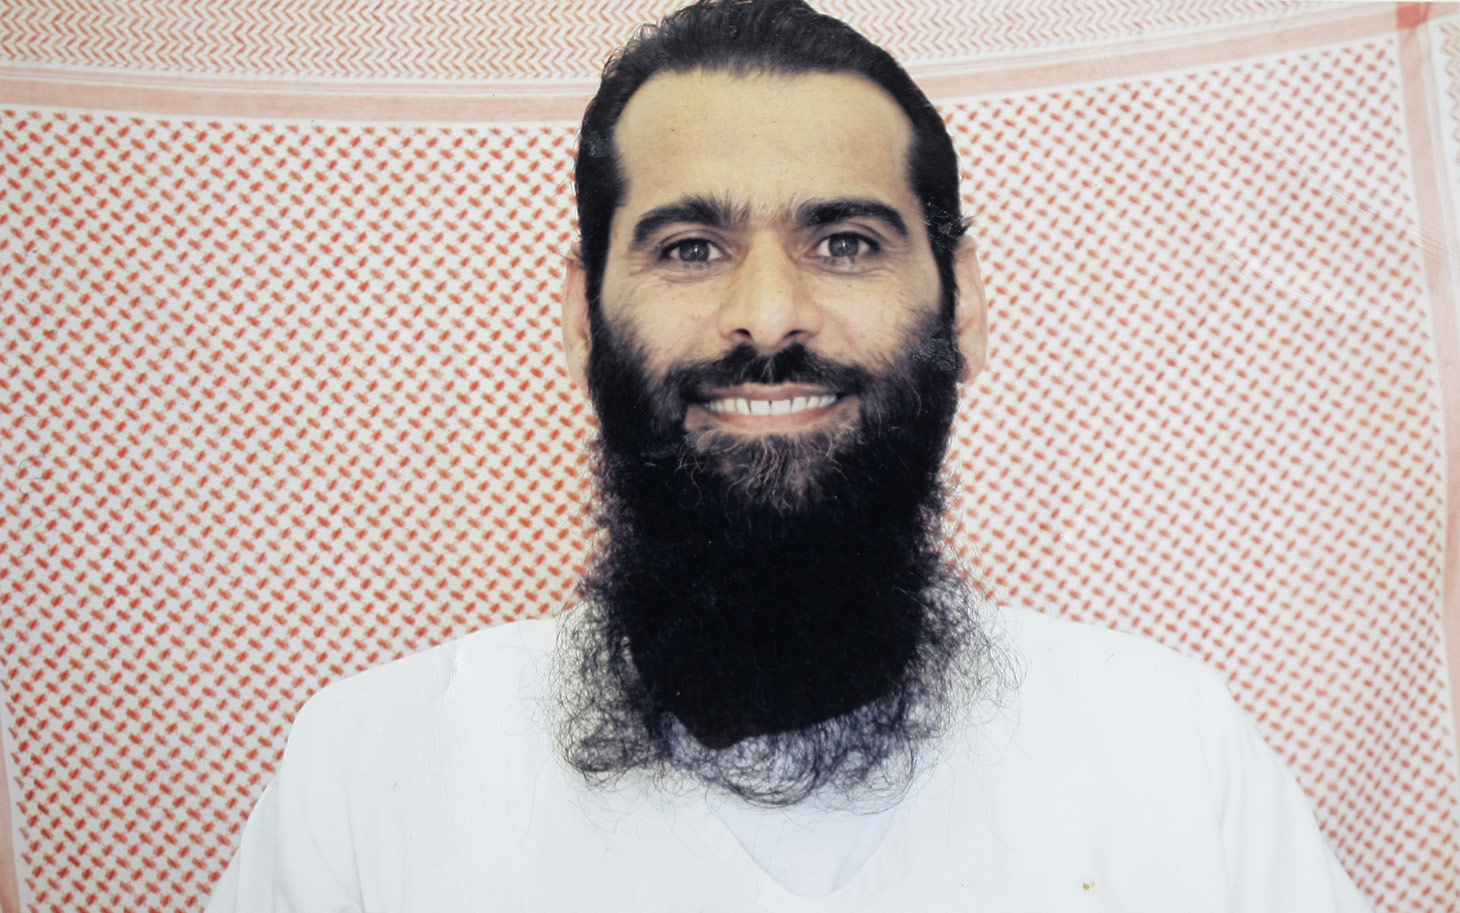 In this undated photo taken by the International Red Cross and provided by the family of Muhammed Rahim al-Afghani, Muhammed Rahim al-Afghani poses for a photo at Guantanamo Bay prison at the U.S. Naval Base in Cuba. Rahim who is being held with the most significant terrorism suspects in U.S. custody has apparently gained extensive knowledge of western pop culture in Guantanamo's Camp 7: the top secret prison-within-a-prison in Guantanamo Bay. Nearly five years ago, Rahim became the last prisoner sent to Guantanamo. He was accused of helping Osama bin Laden elude capture. (AP Photo/International Red Cross via Rahim family)